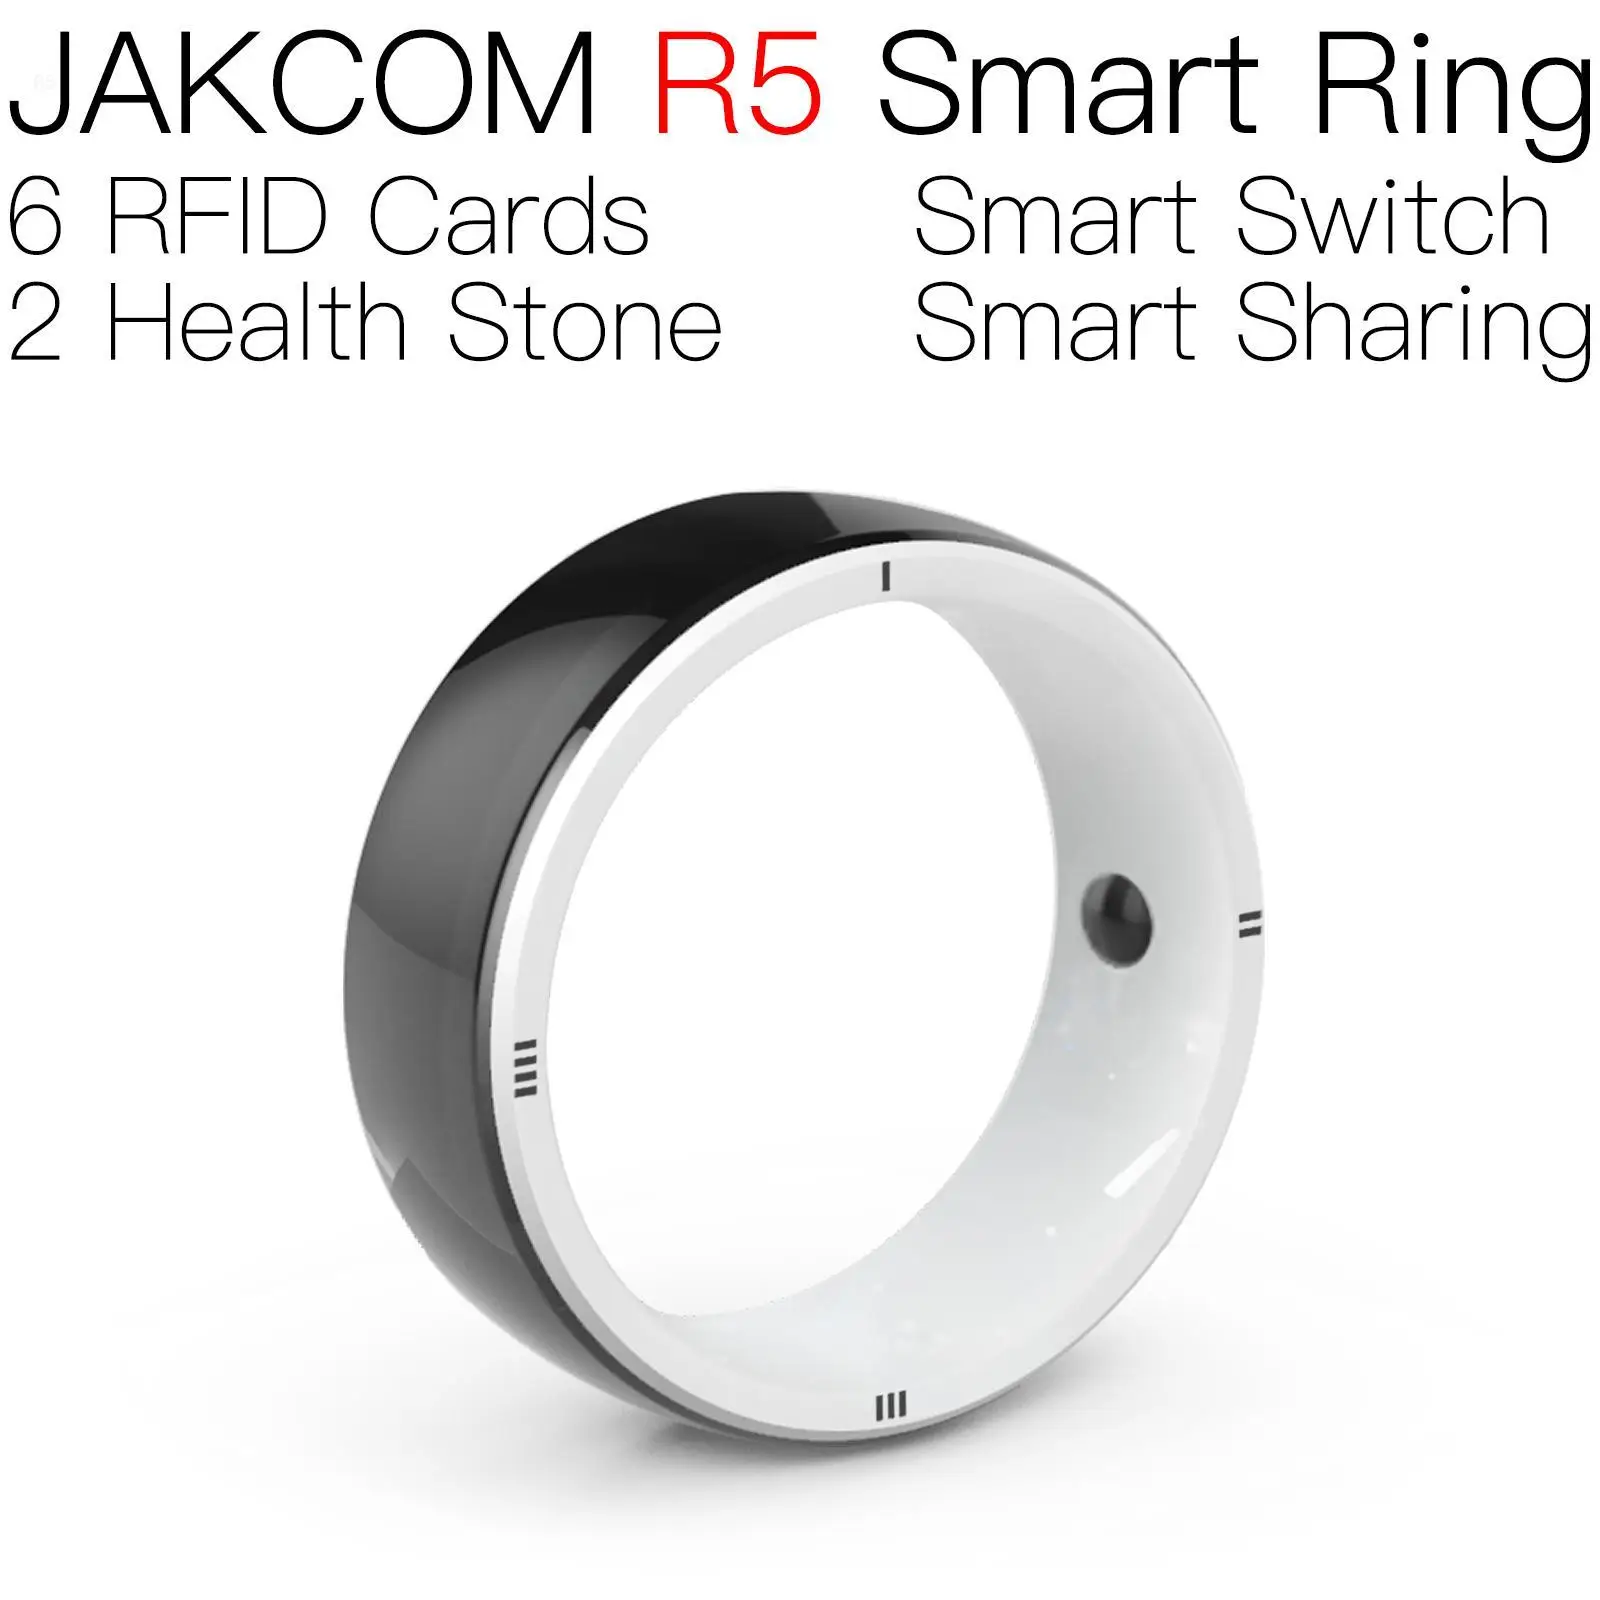 

JAKCOM R5 Smart Ring Super value as switch accessories 4 band store smart watches for mens 5 global xaomi official qin